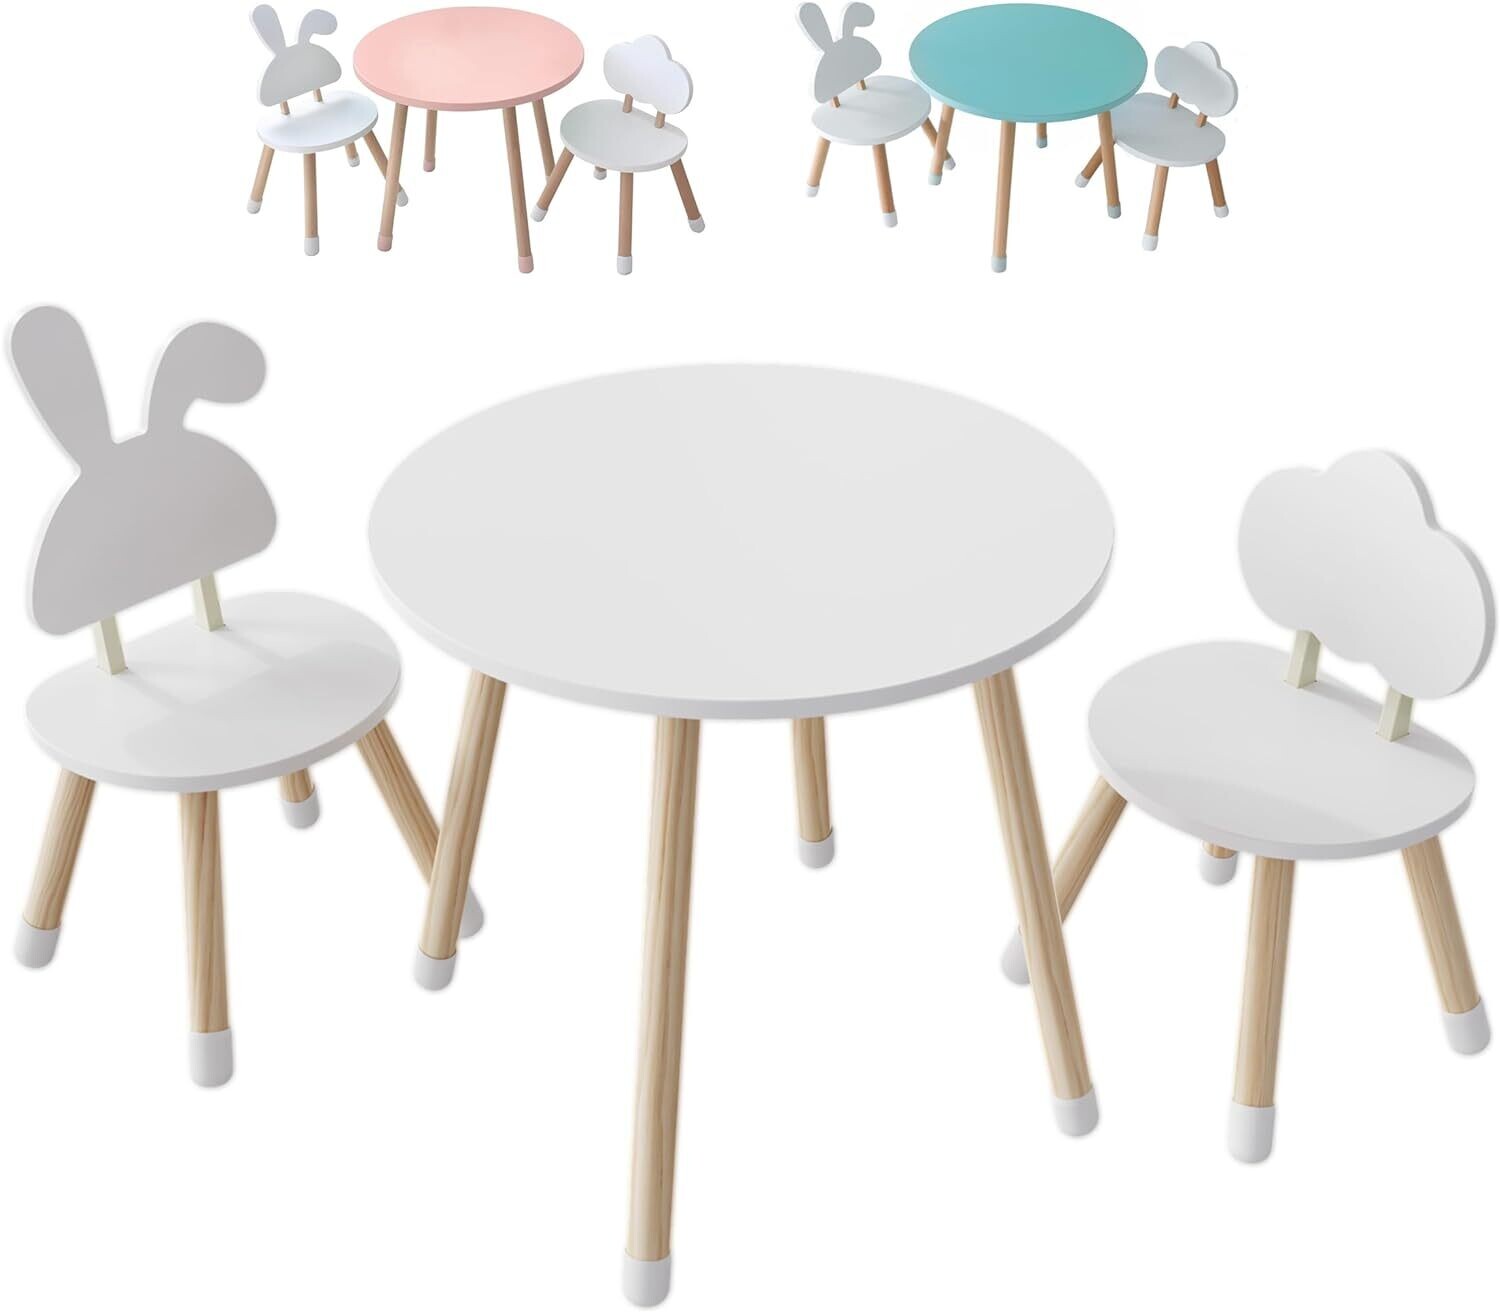 Children's wooden table with chairs